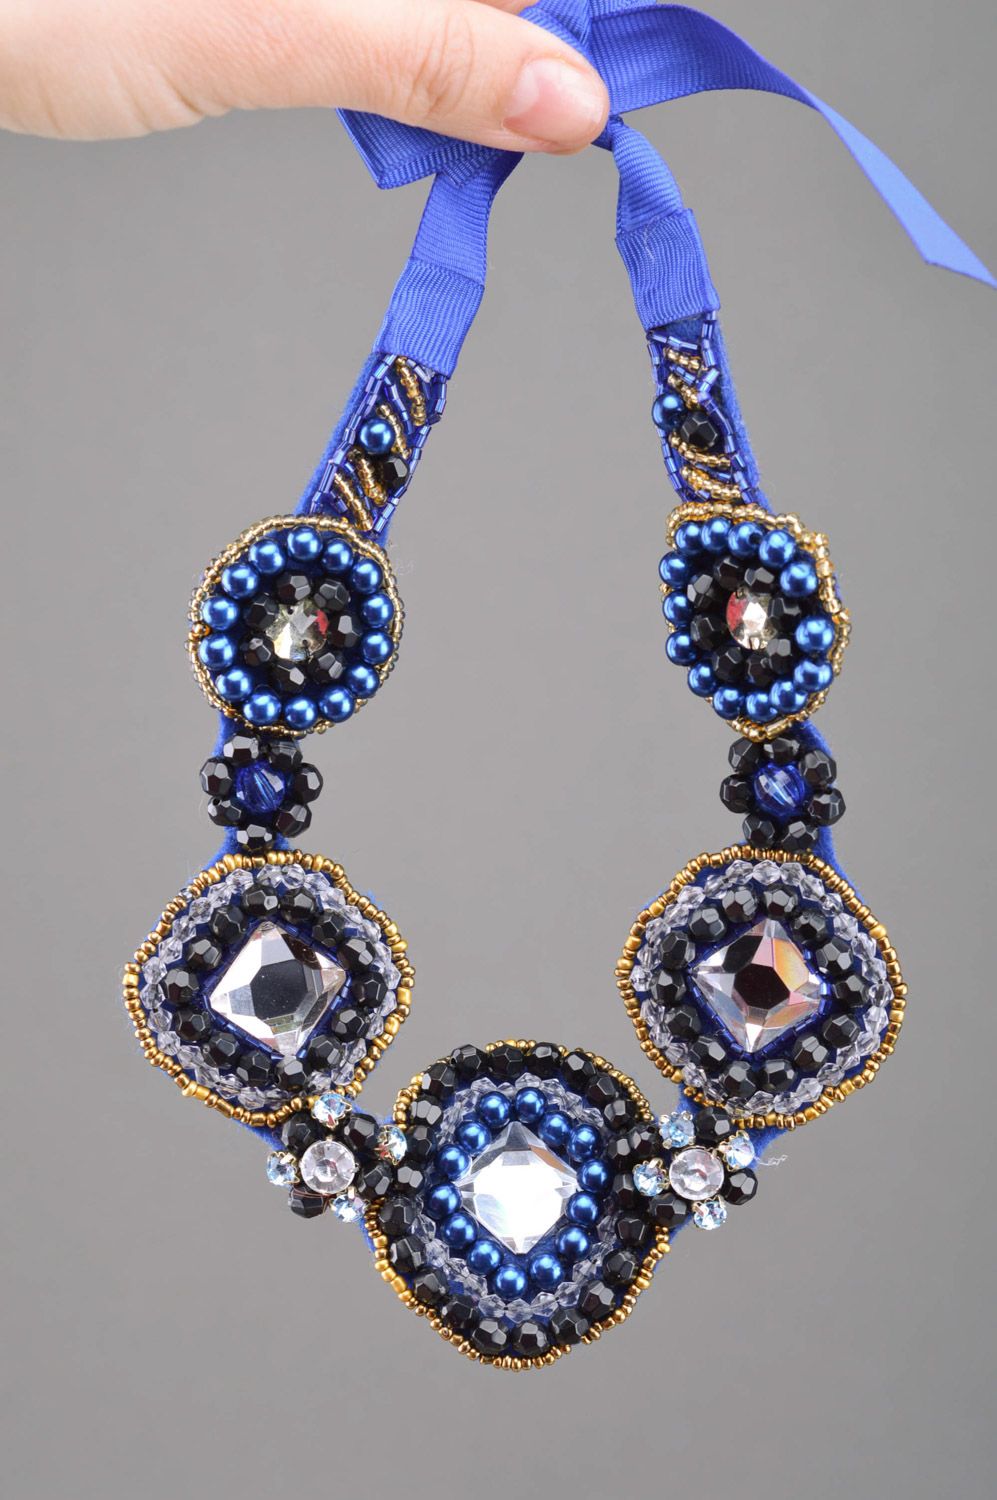 Elegant handmade bead embroidered collar necklace in blue colors 1001 nights photo 3